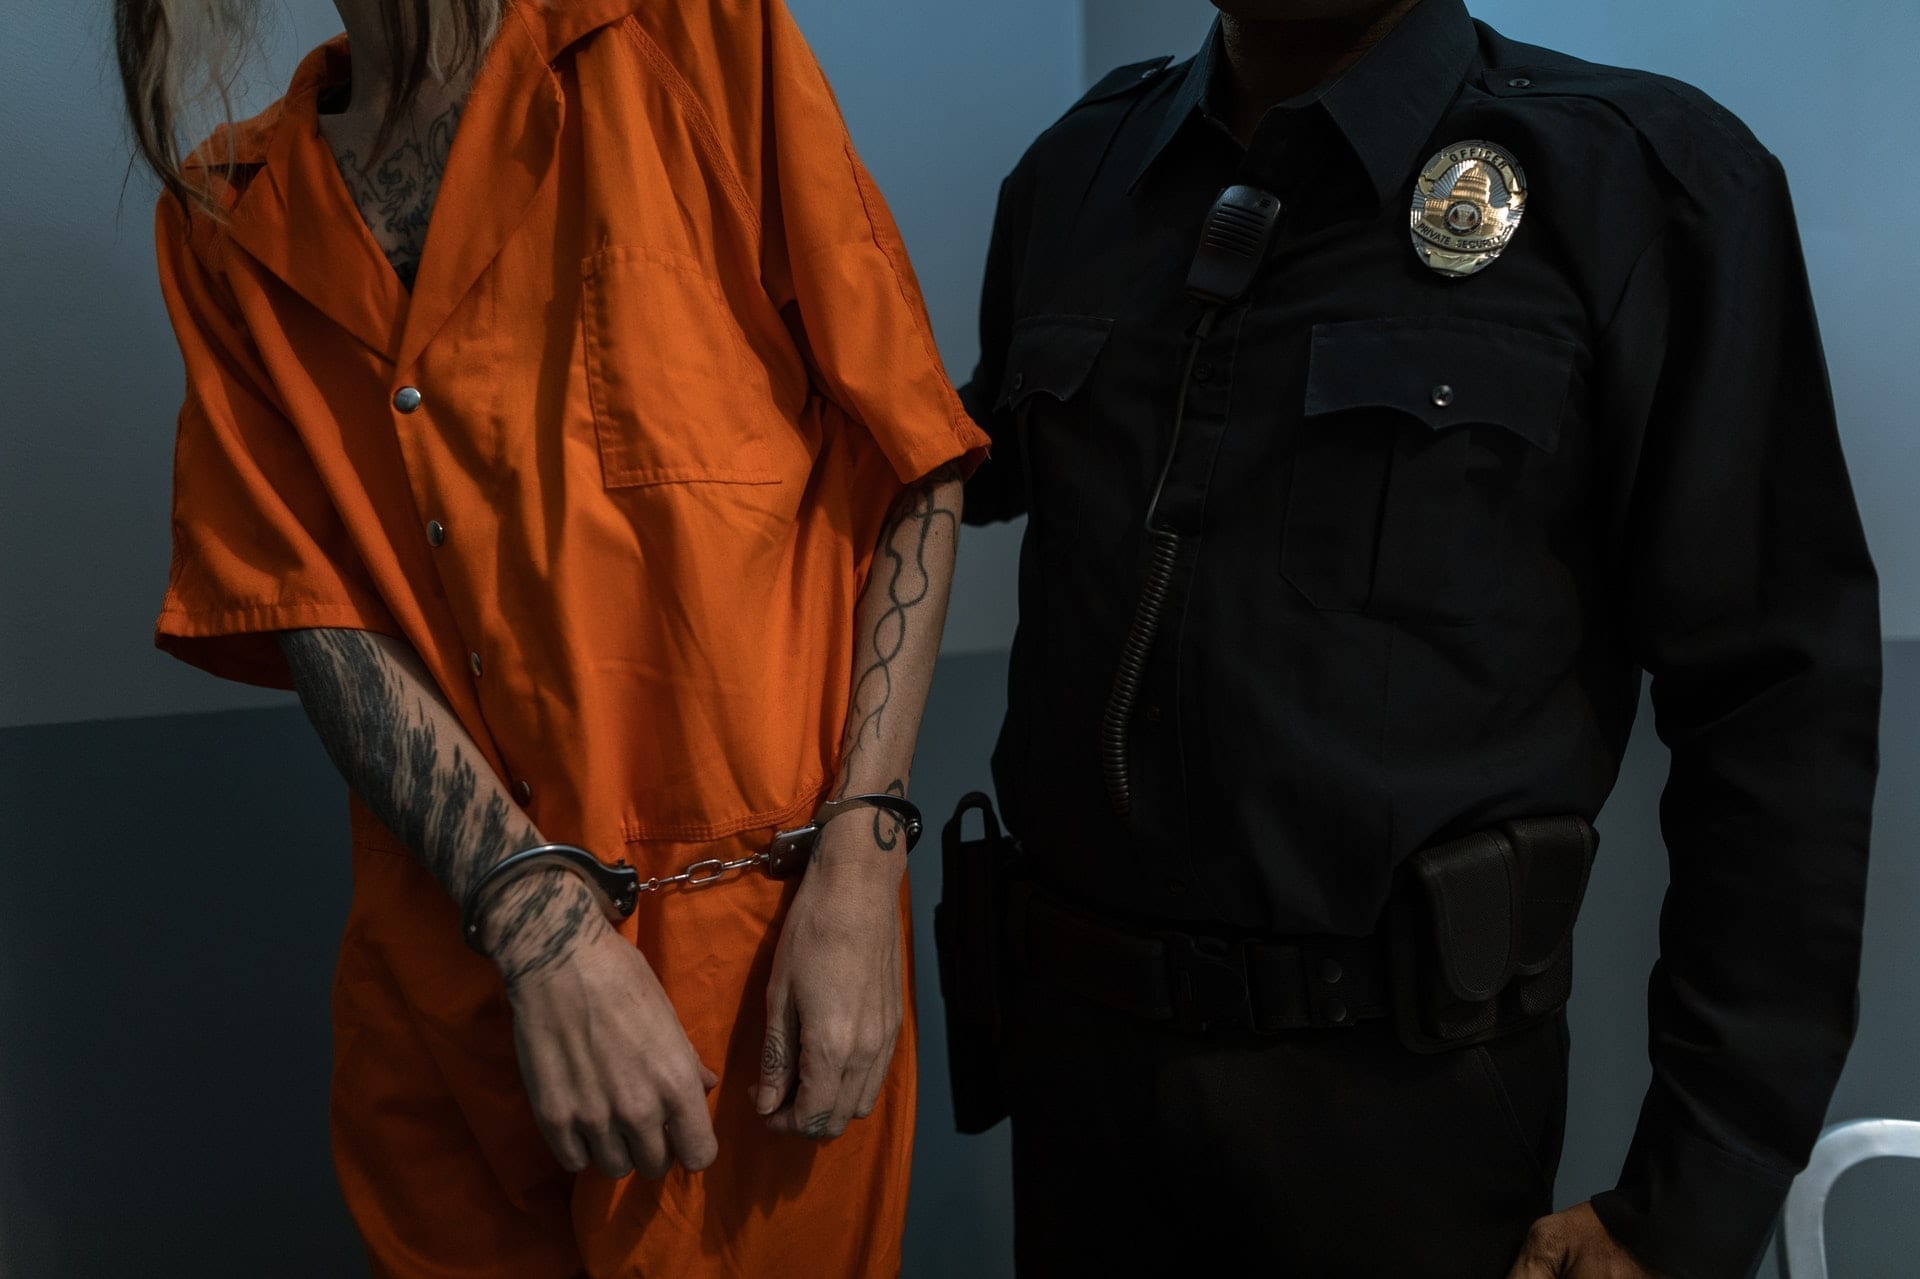 What Rights Do Foreign Prisoners Have in U.S. Prisons?